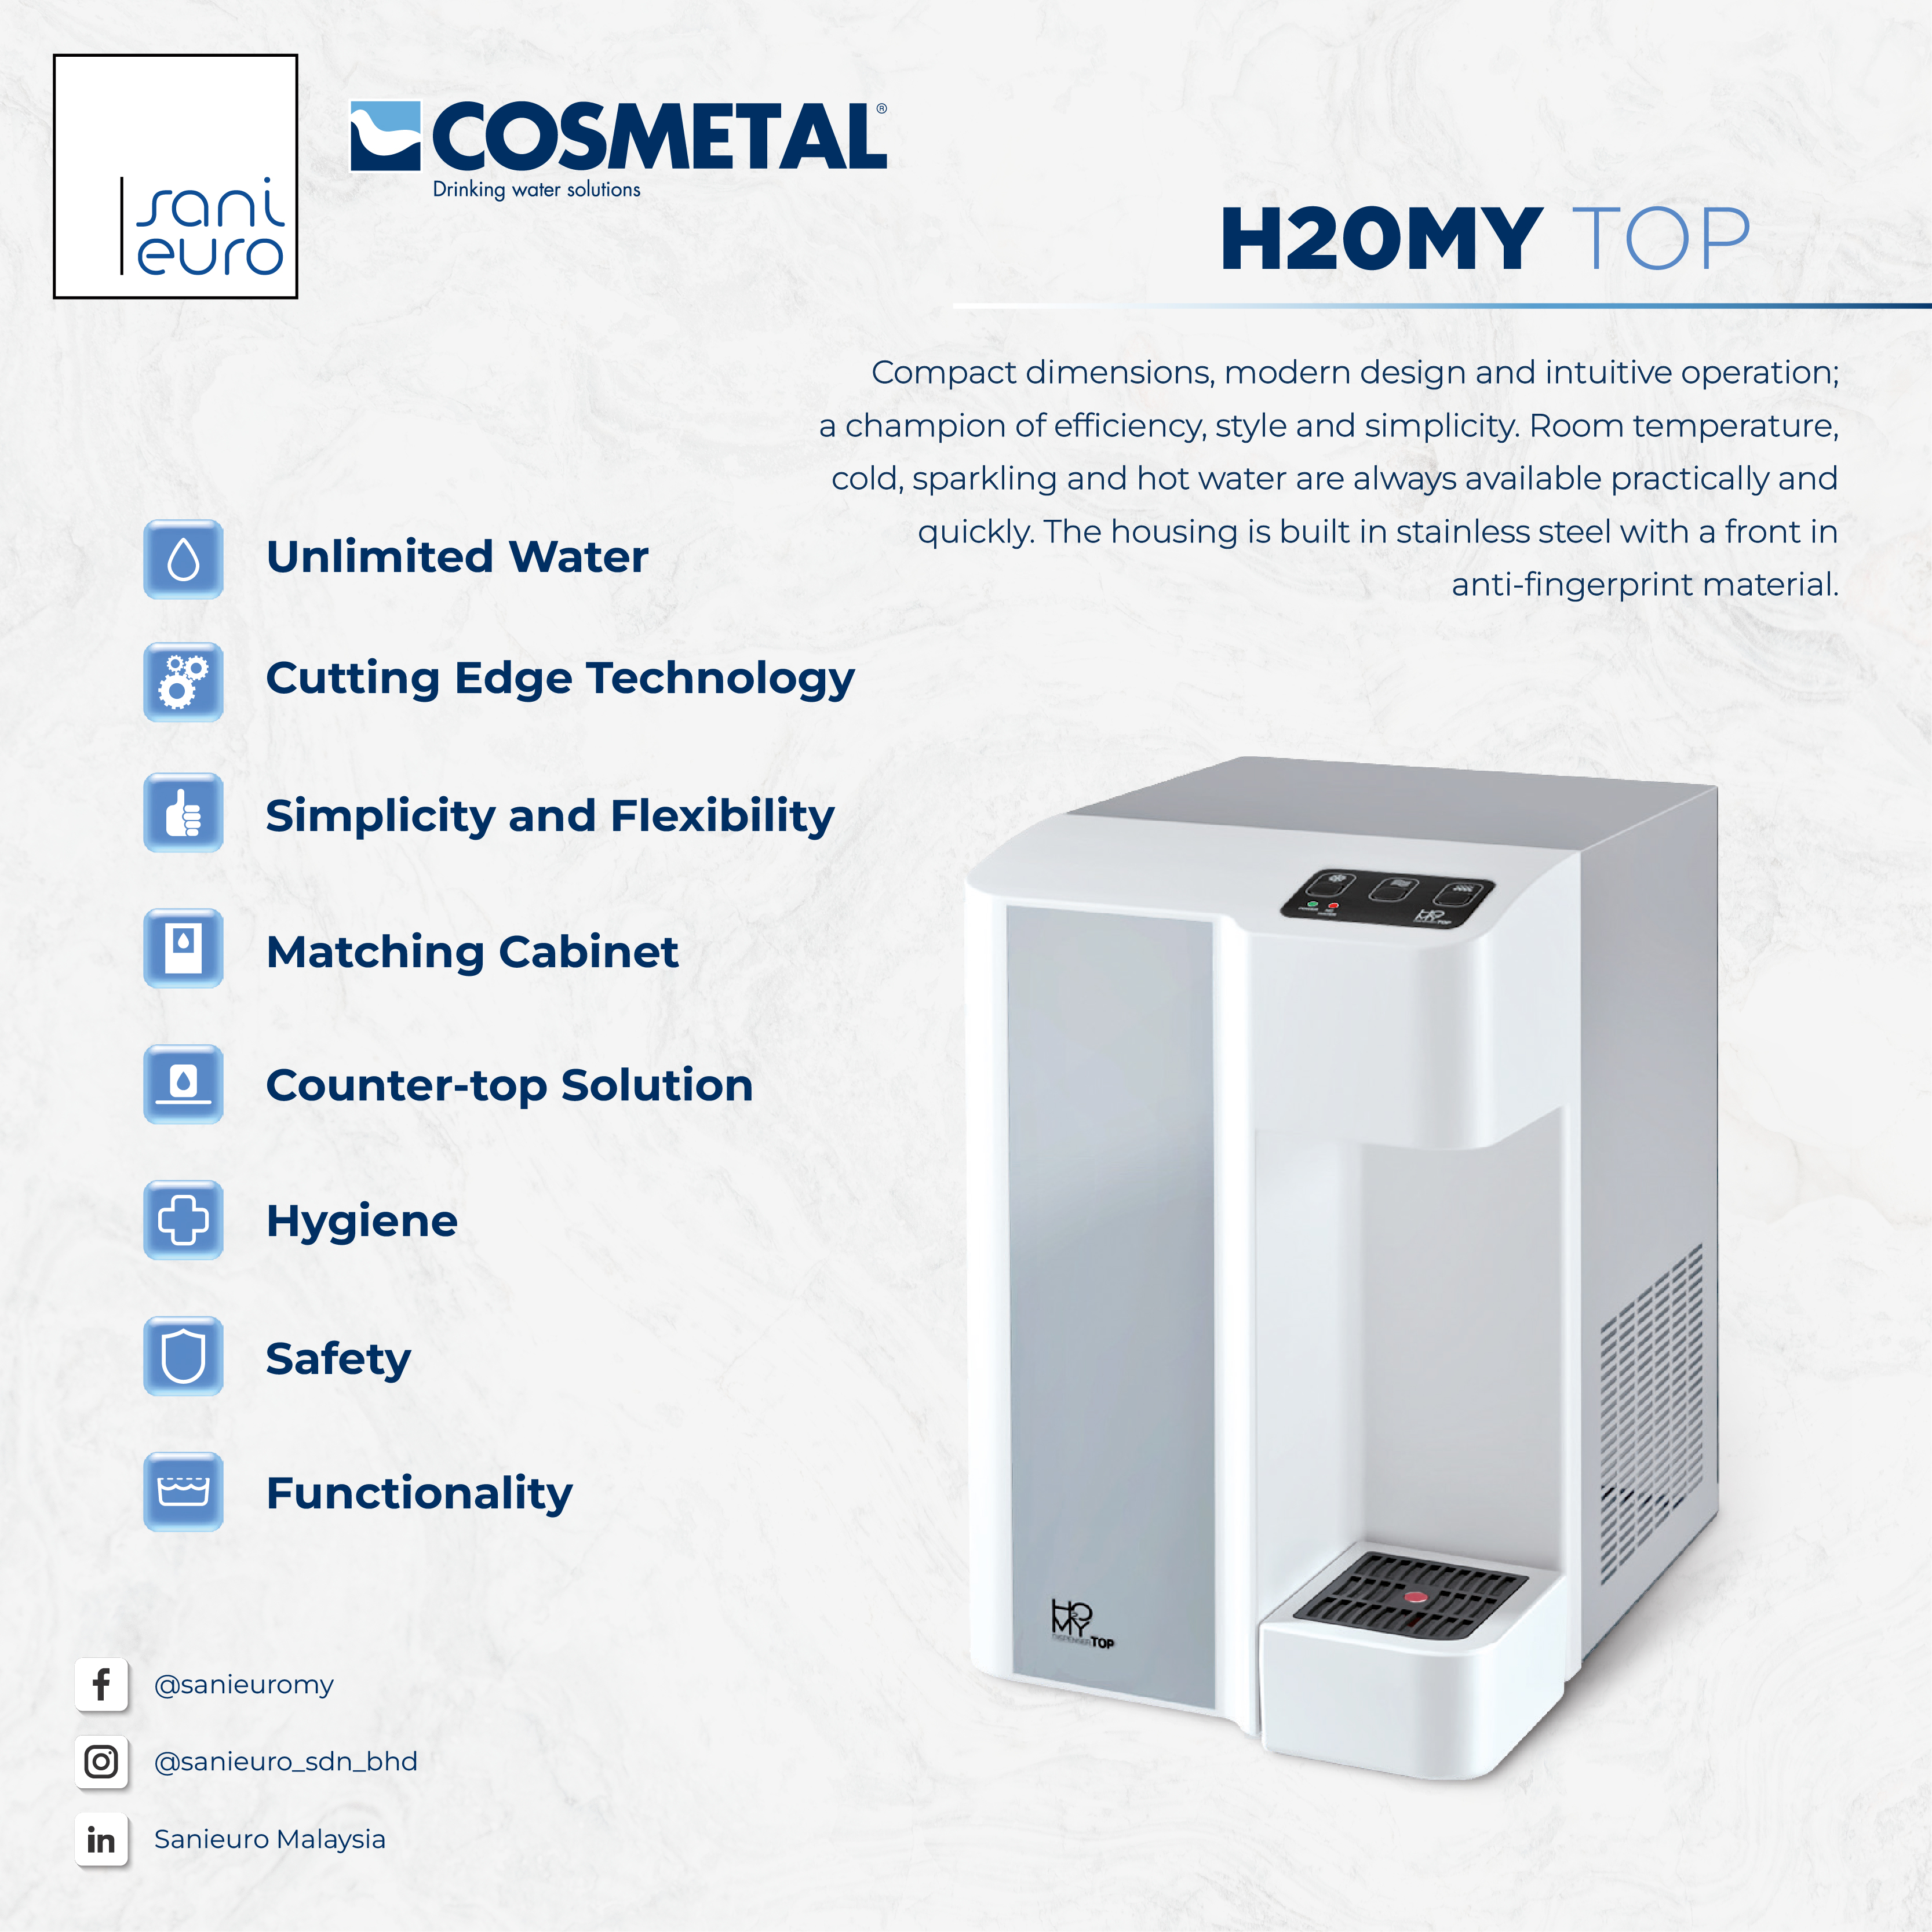 Celli Cosmetal H2OMY TOP Water Dispenser (AMBIENT, HOT & COLD)